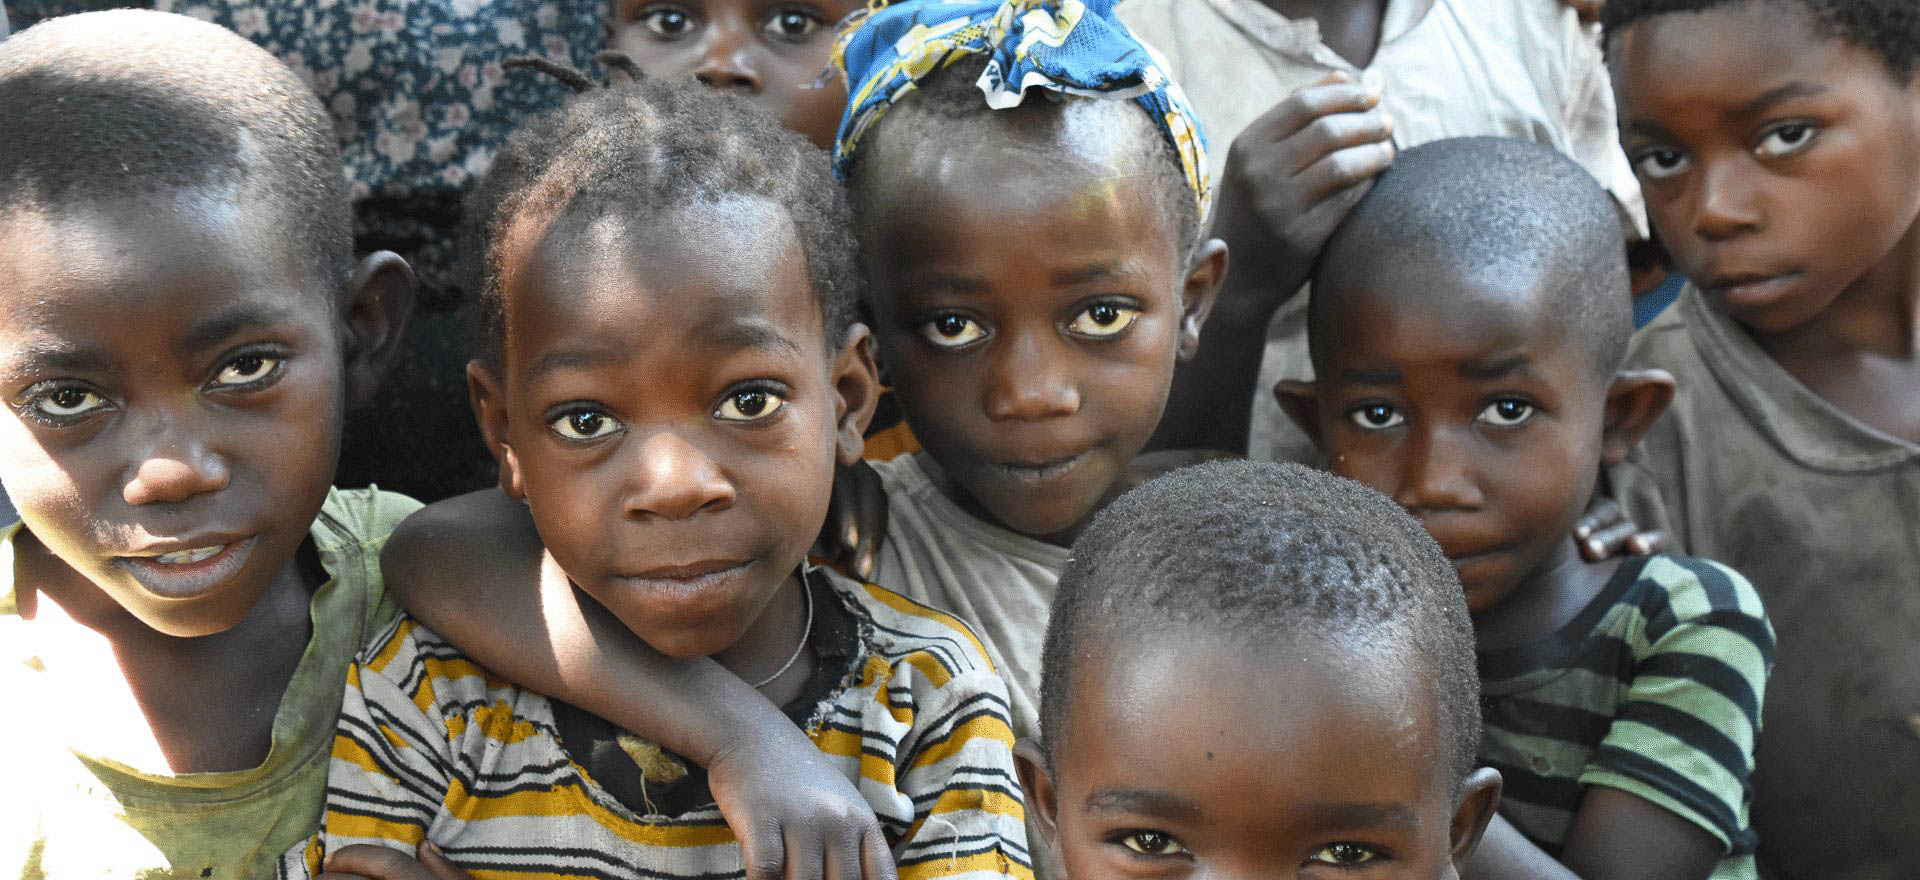 Children in Goma - Congo tours and holidays